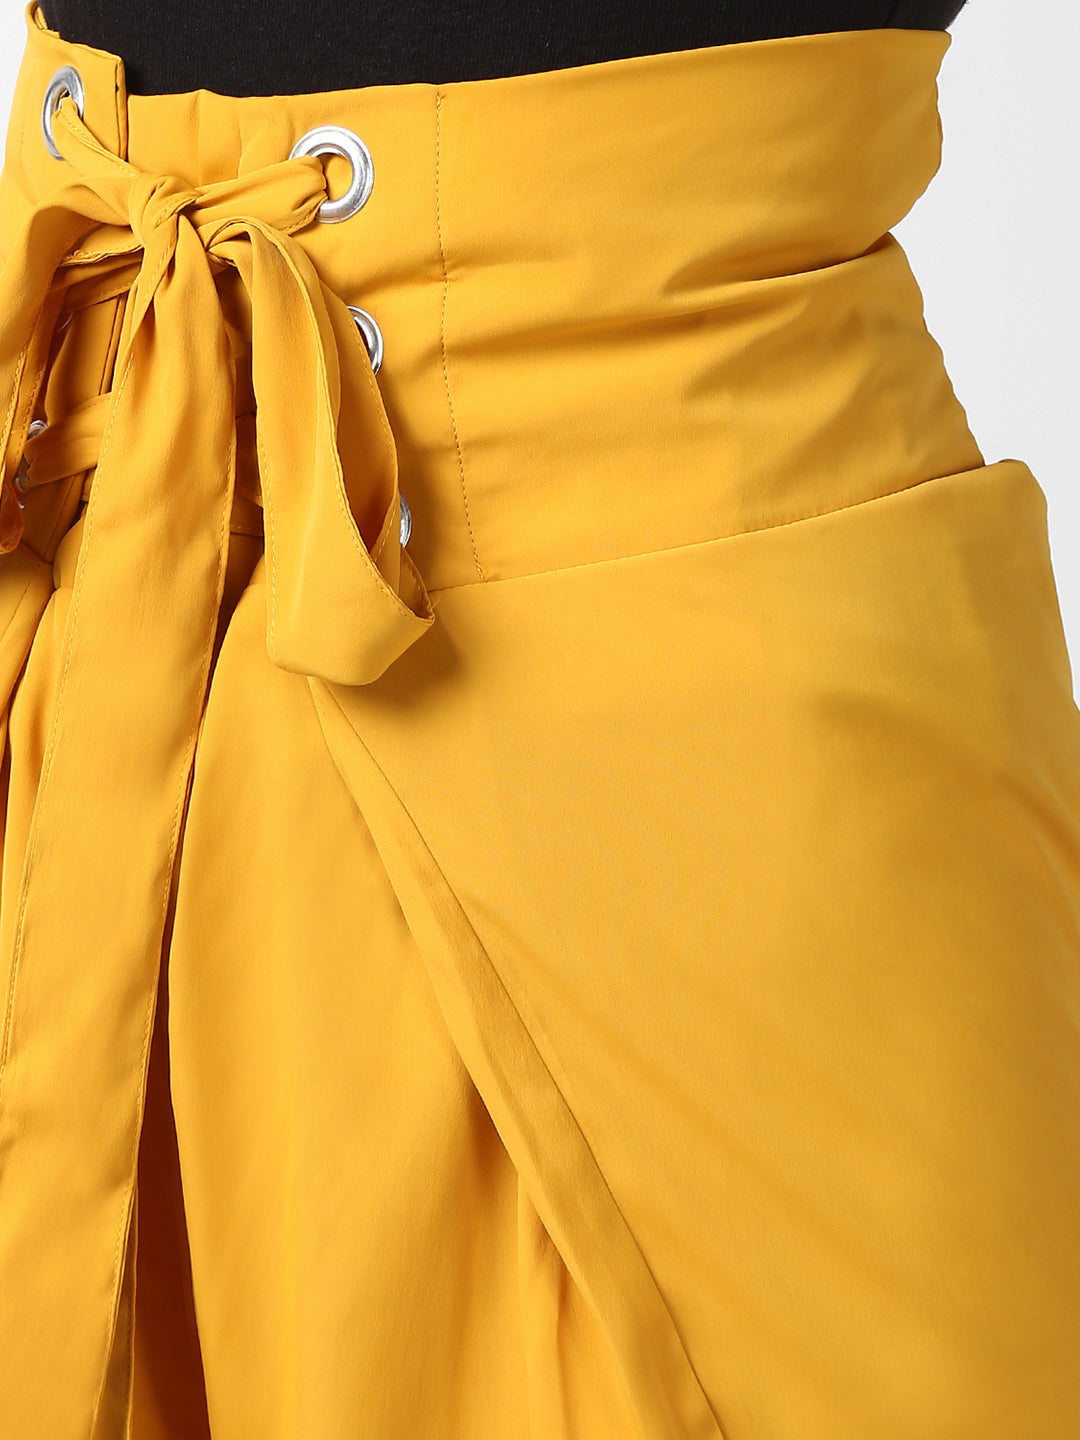 Women's Yellow Polyester High Waisted Palazzo with front Rivets and Back Elastic